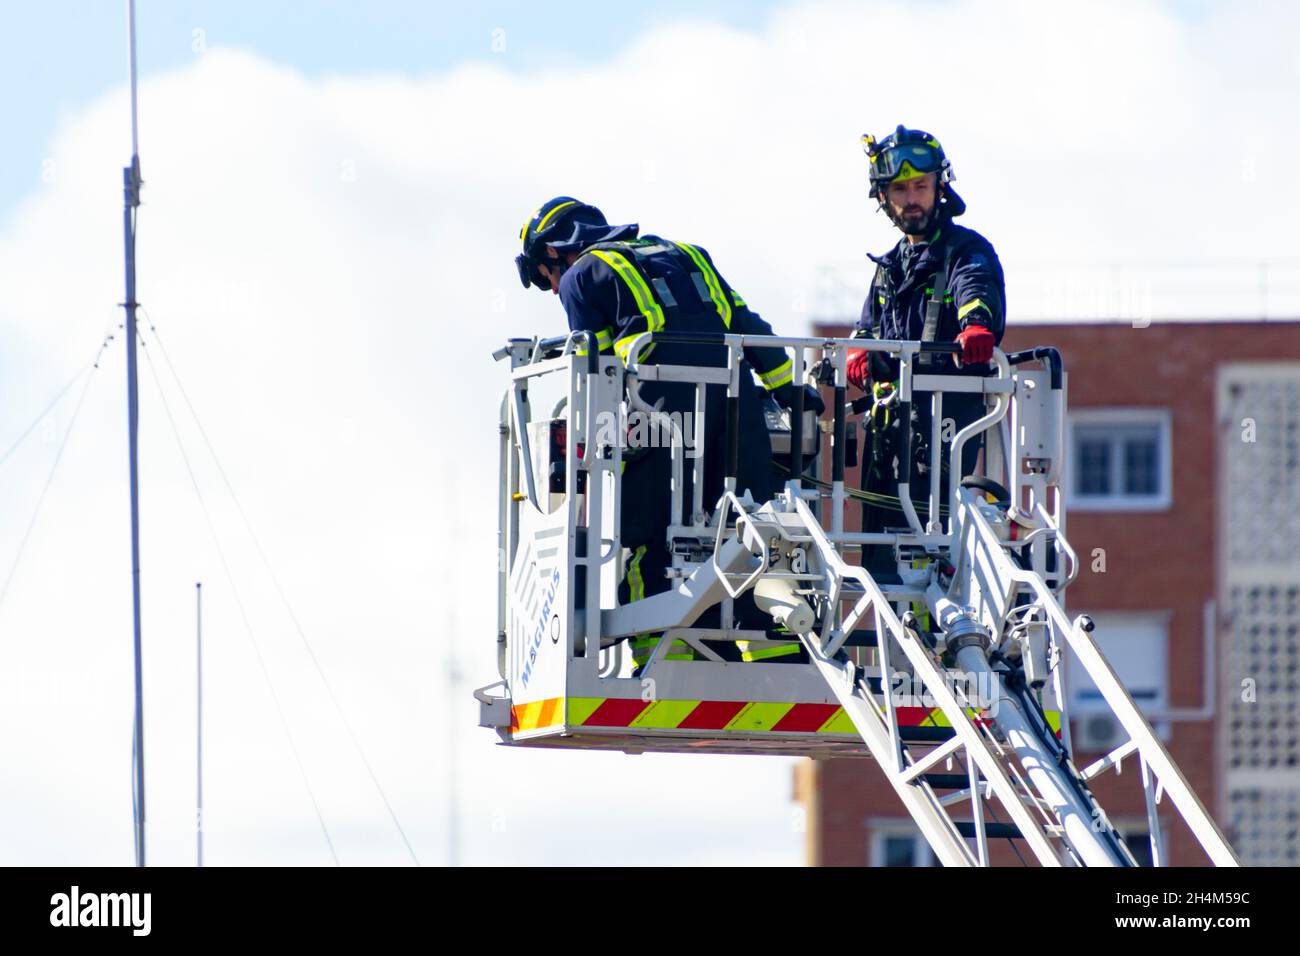 Firefighters climb a scale of a truck in one of the trainings in the fire station, in Madrid, Spain. Europe. Stock Photo